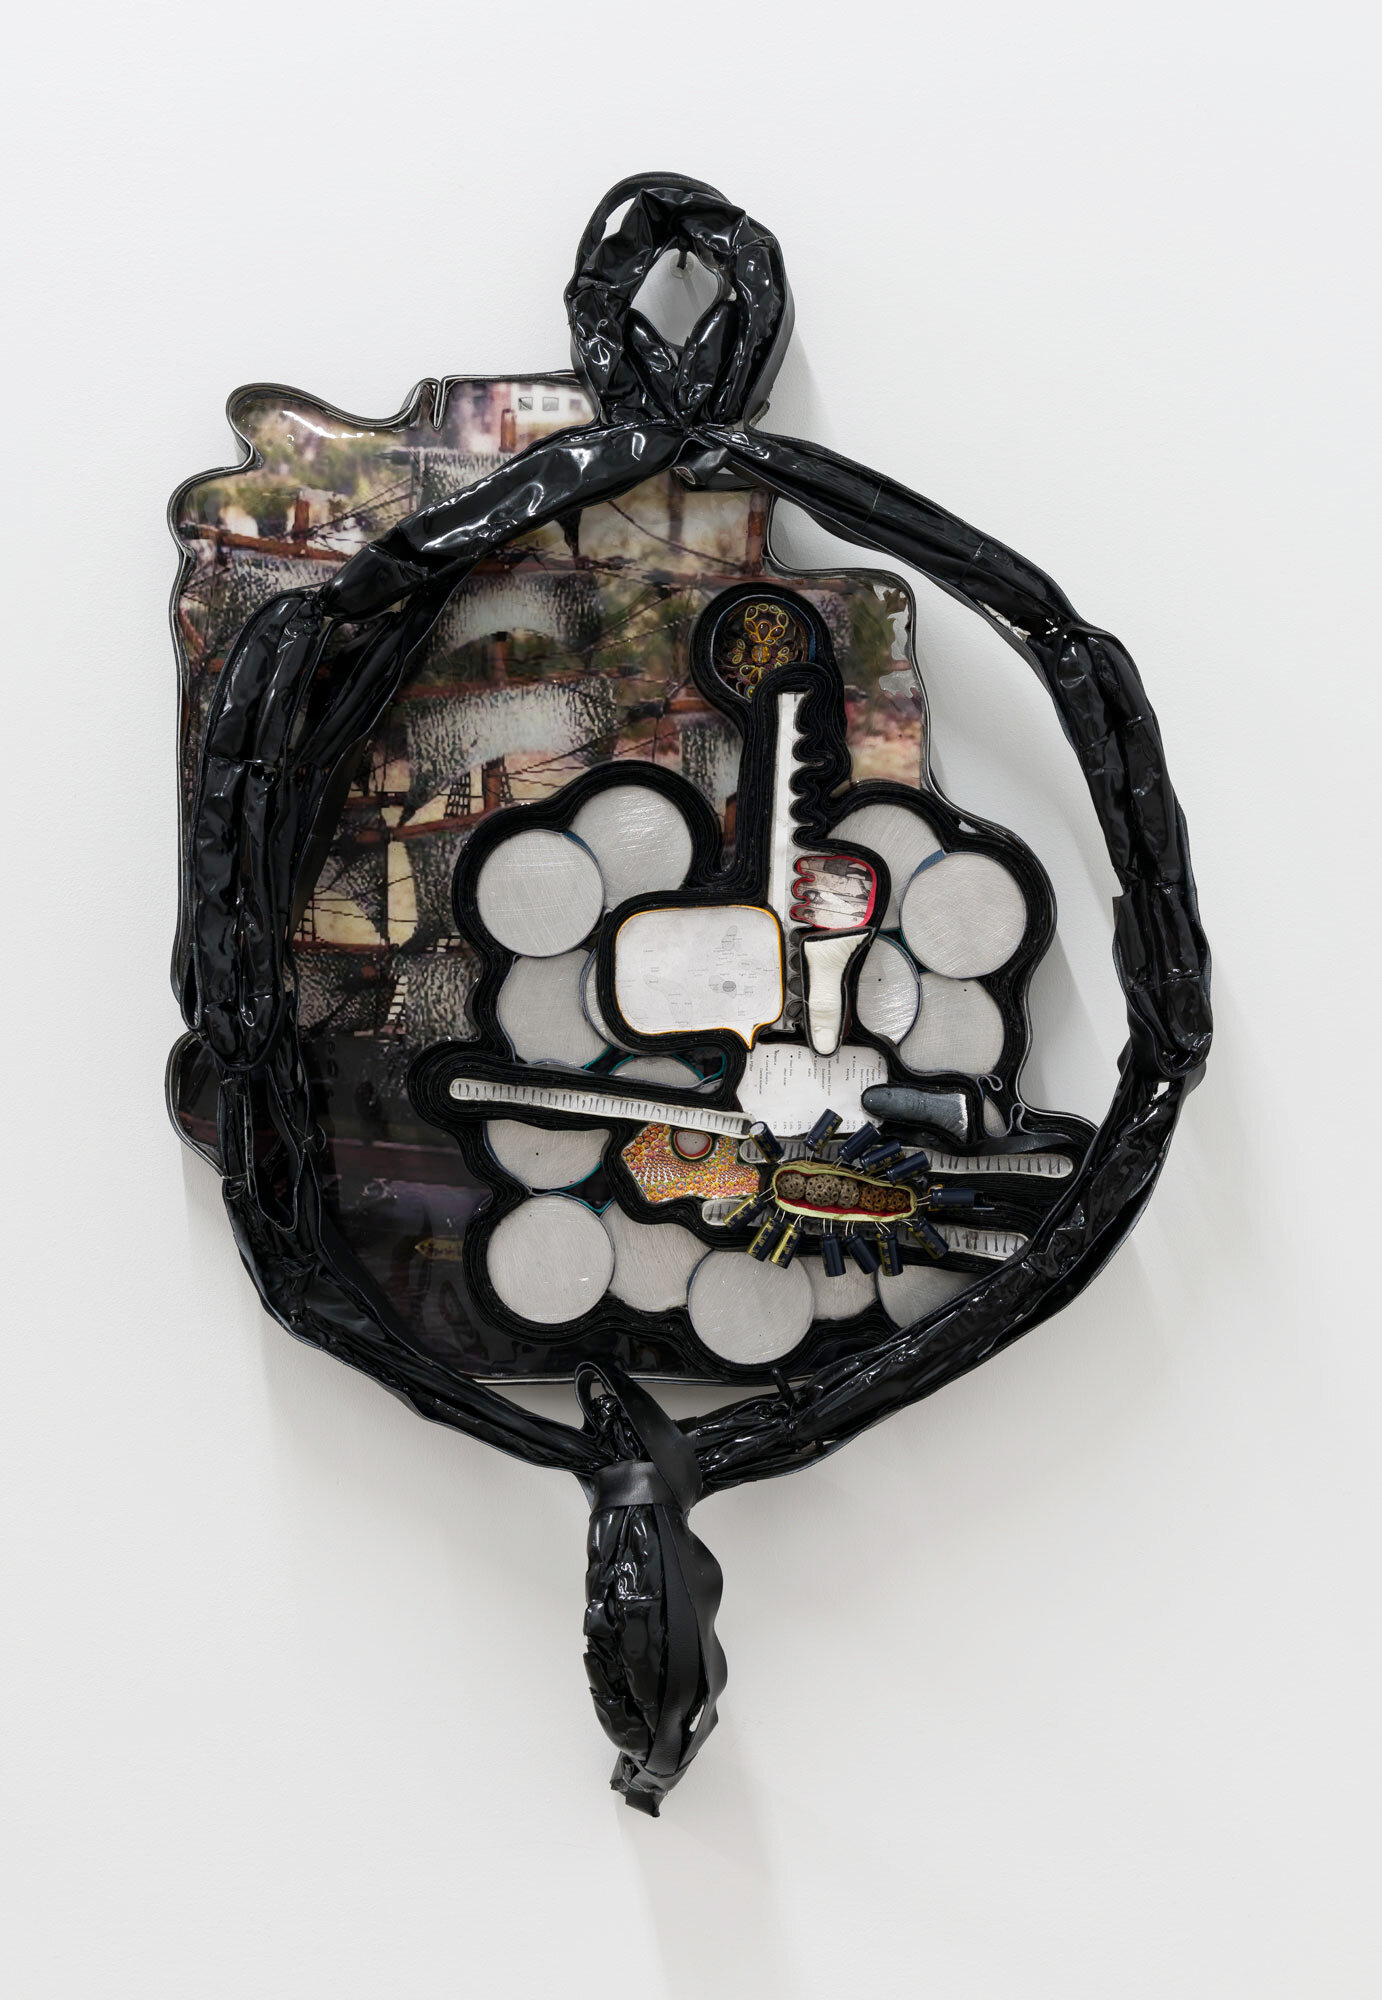  Alicia Piller  Gene Permutations  2019 Vinyl, leather, latex balloons, digital photographs, recycled batteries, Melaleuca Globifera seeds, metal, resin, and glass 40h x 27w x 3 1/2d in 